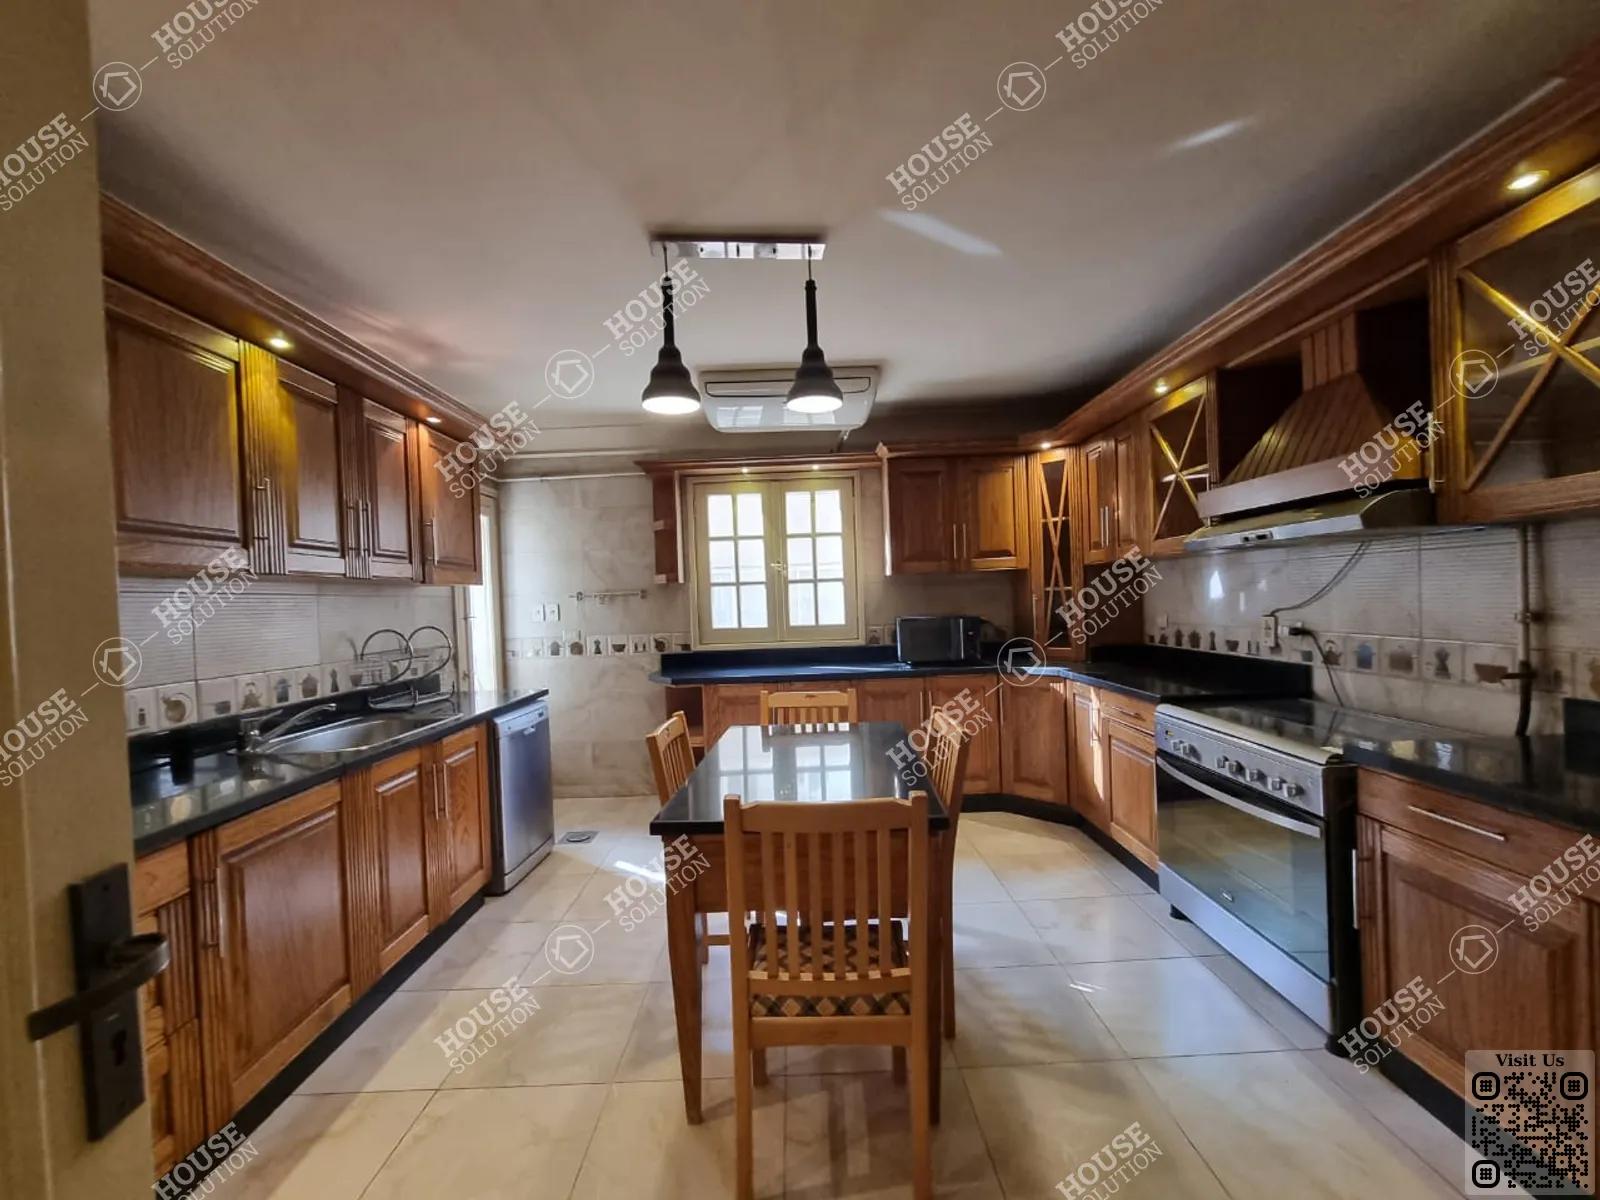 KITCHEN  @ Apartments For Rent In Maadi Maadi Sarayat Area: 345 m² consists of 4 Bedrooms 3 Bathrooms Modern furnished 5 stars #5423-1